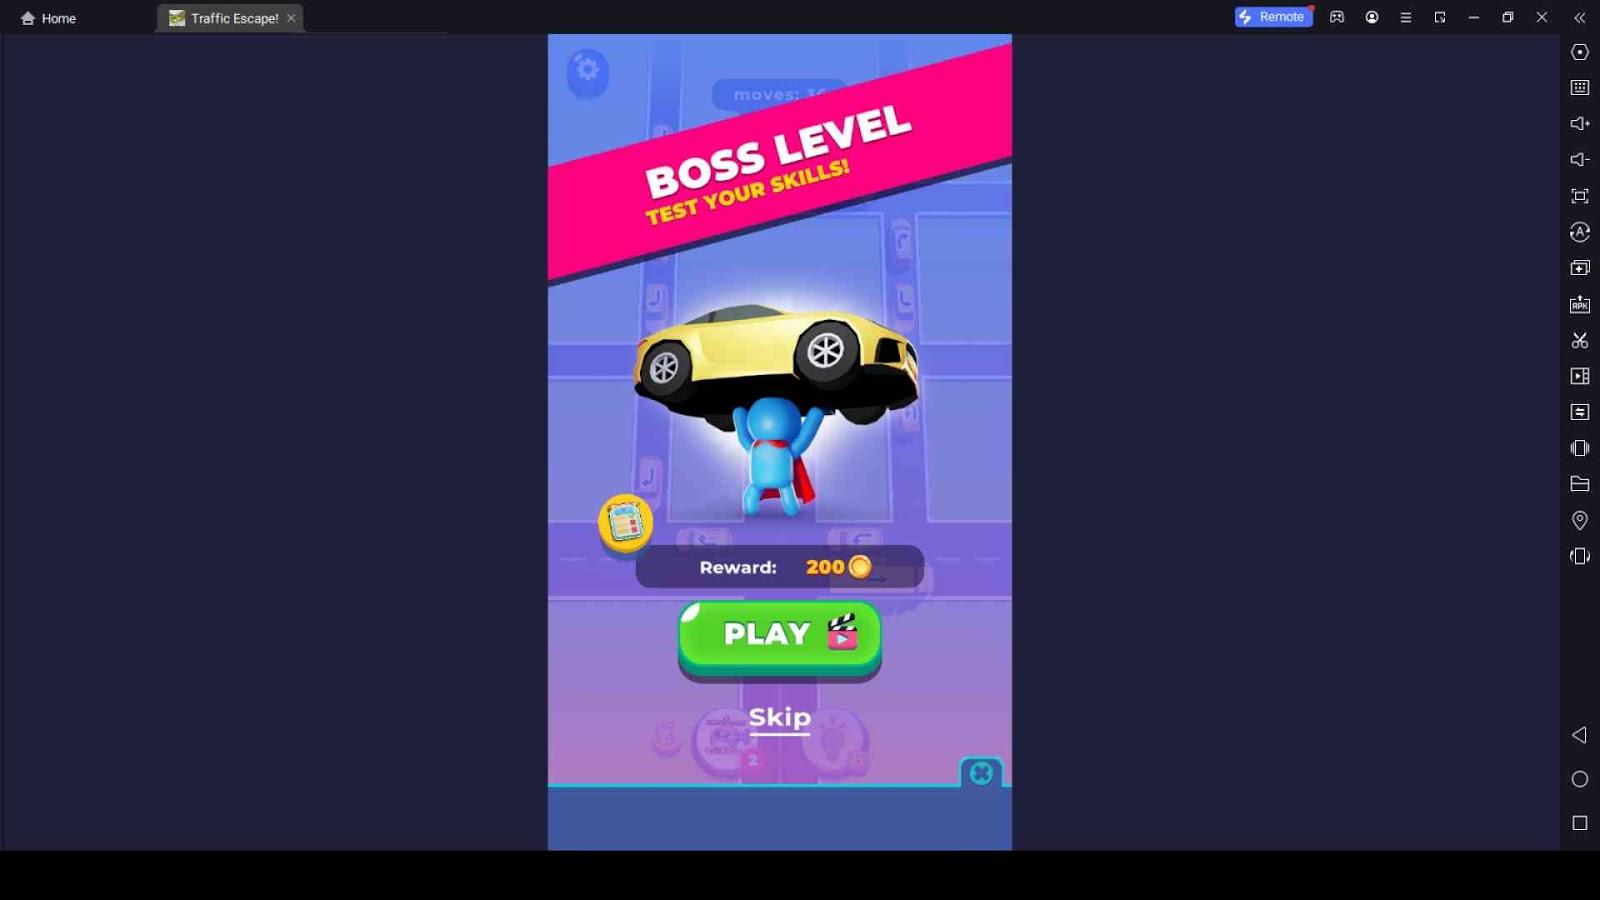 Boss Challenges